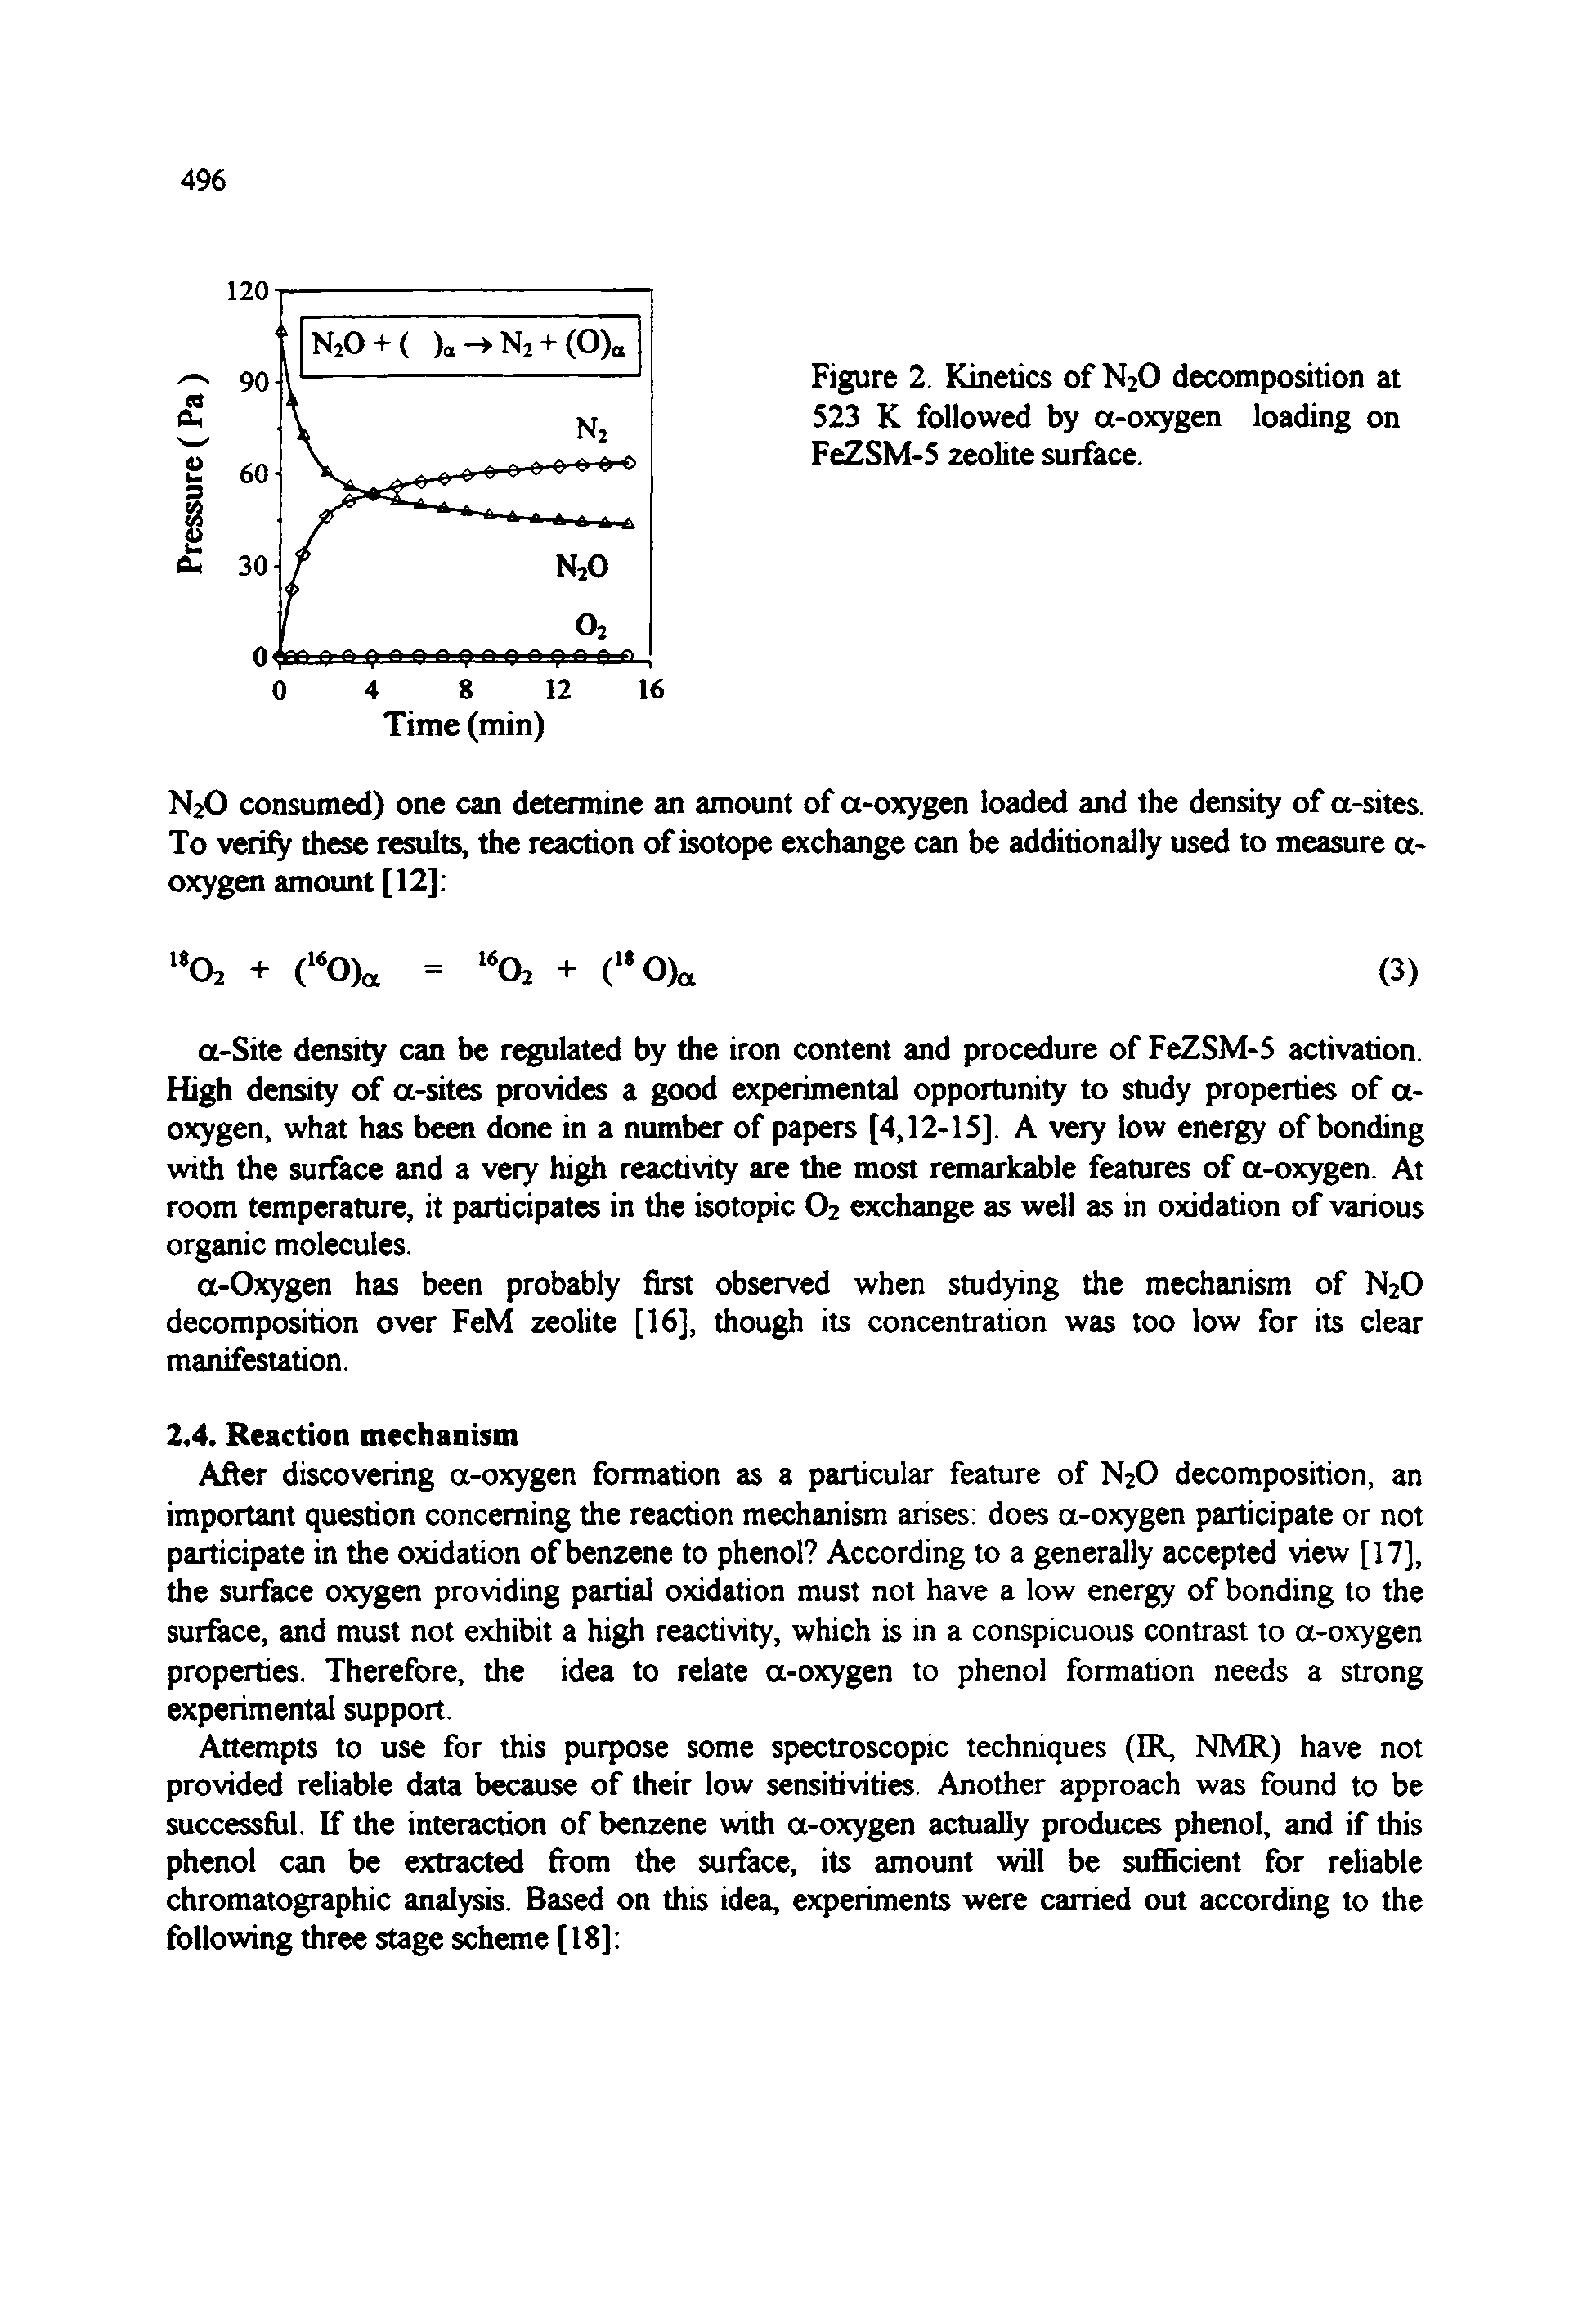 Figure 2. Kinetics of N2O decomposition at 523 K followed by a-oxygen loading on FeZSM-5 zeolite surface.